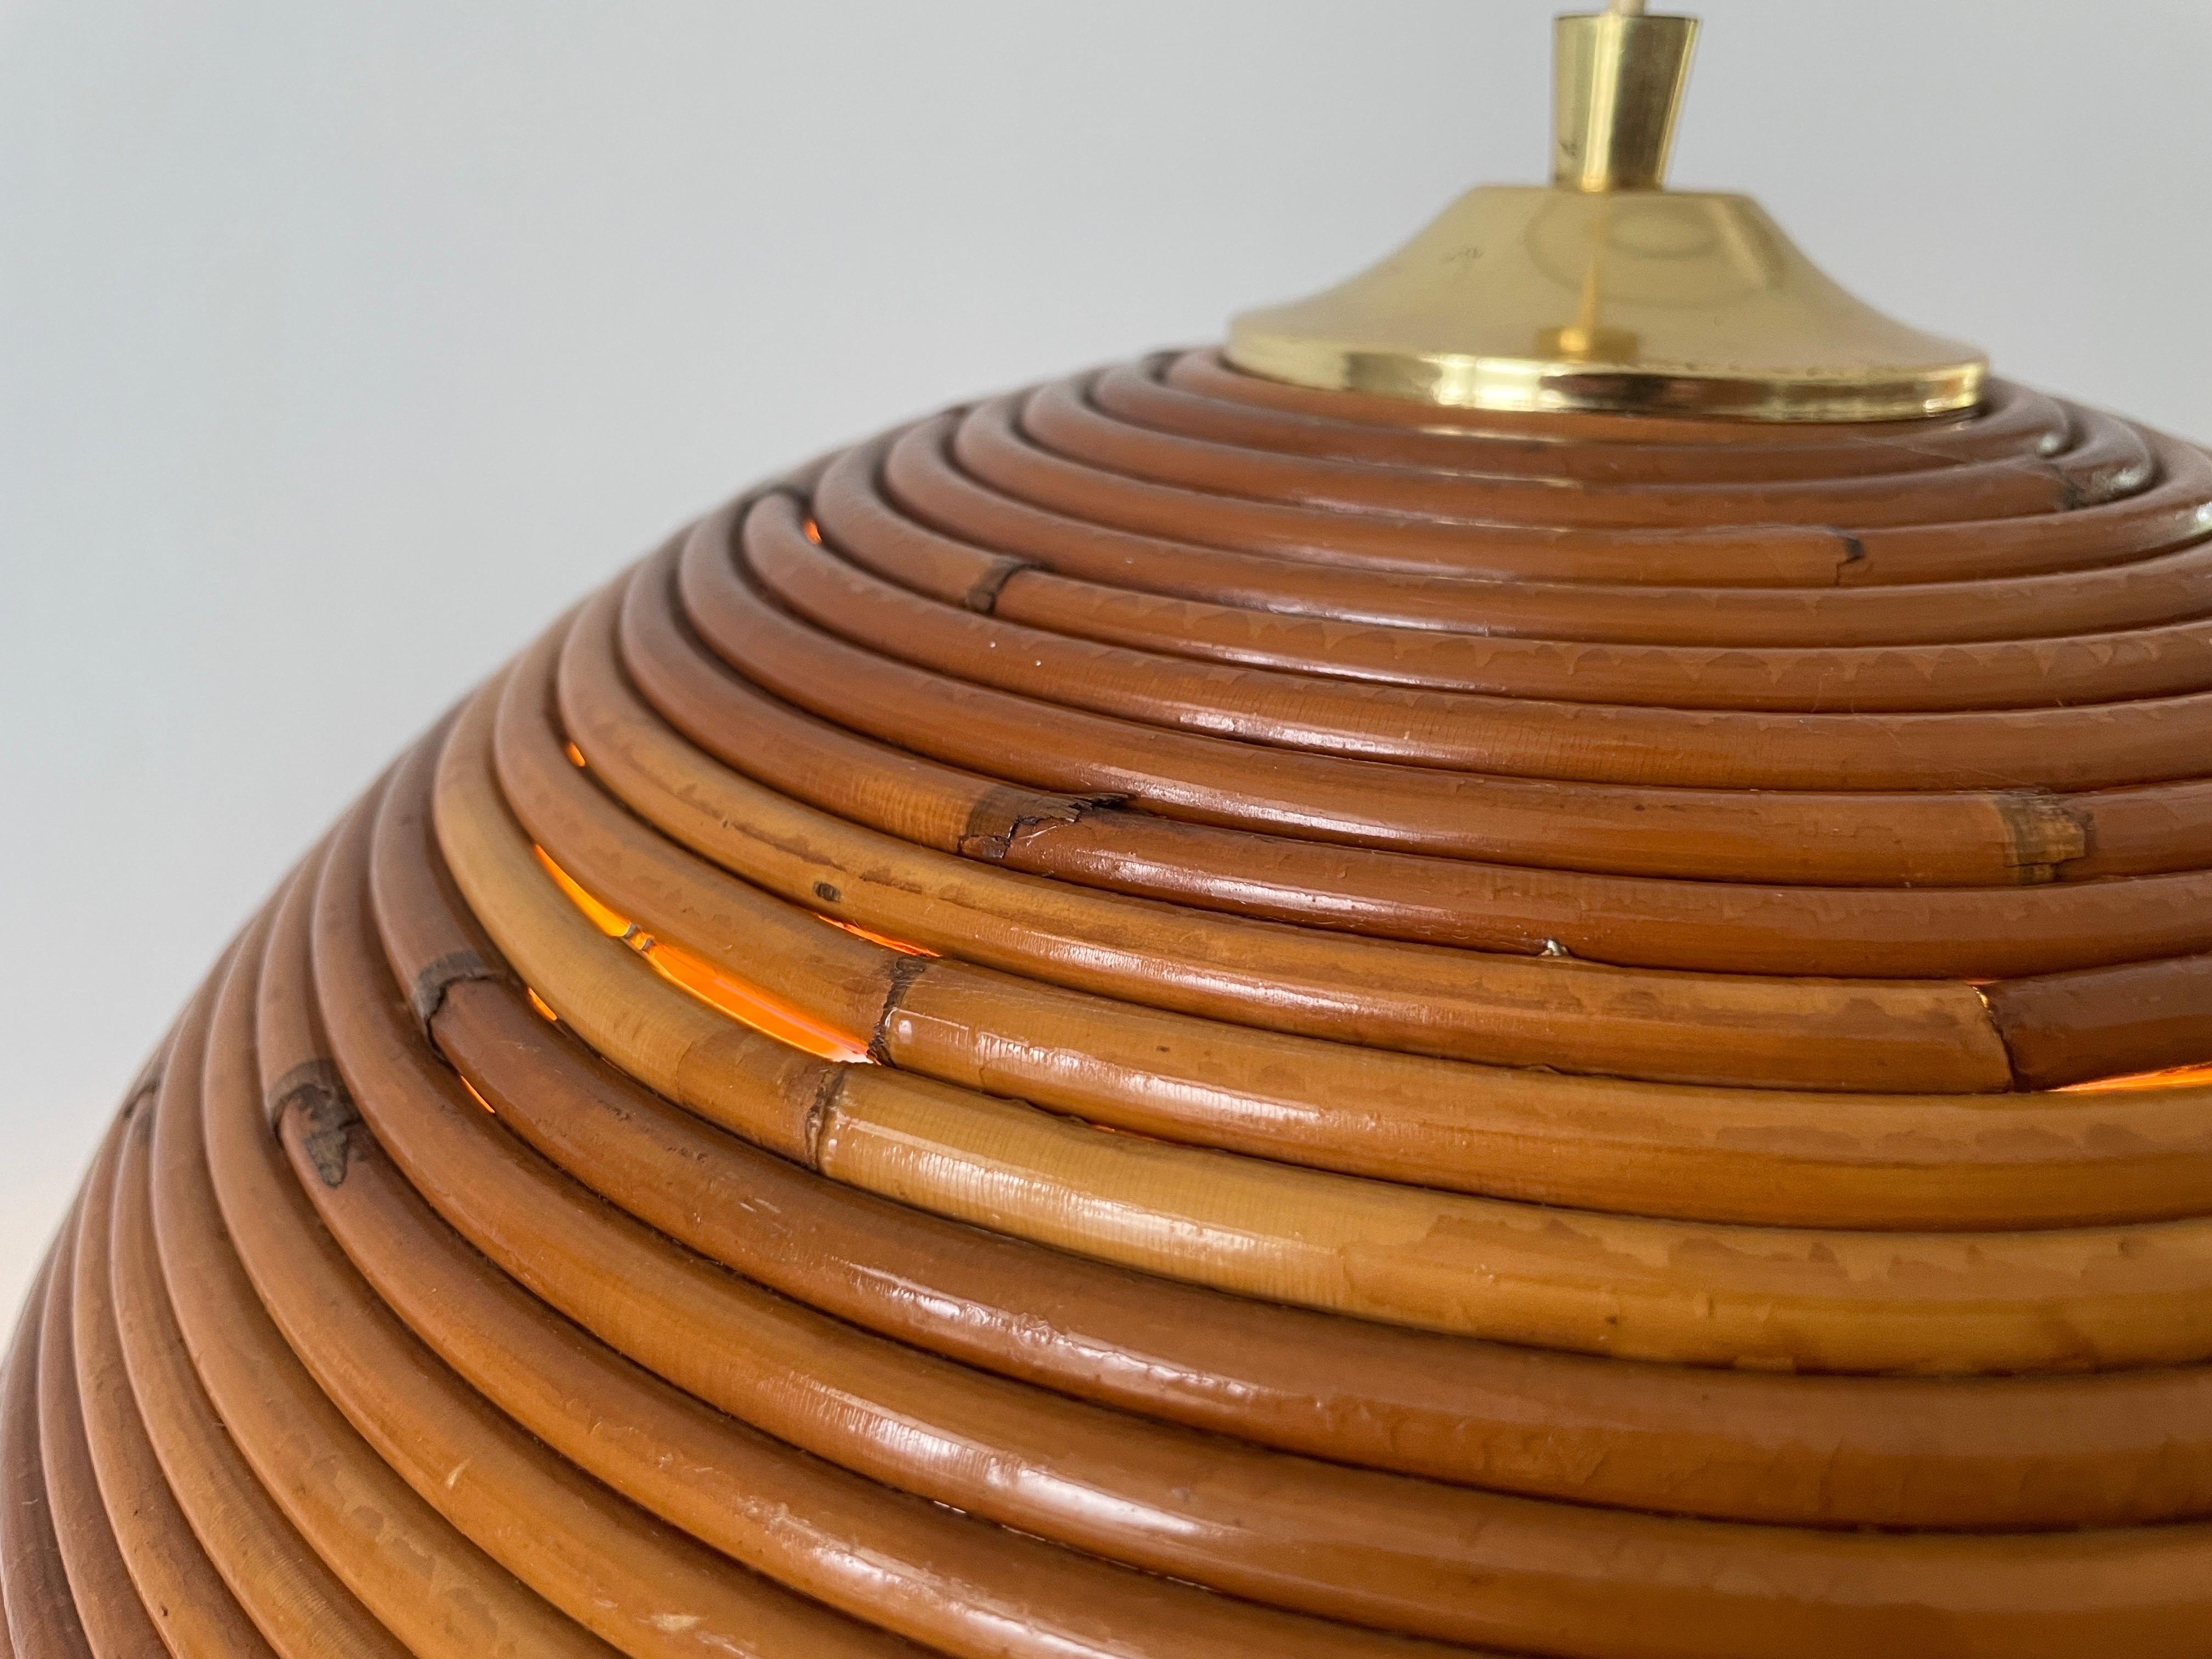 Mushroom Shaped Bamboo Pendant Lamp, 1960s, Germany In Excellent Condition For Sale In Hagenbach, DE